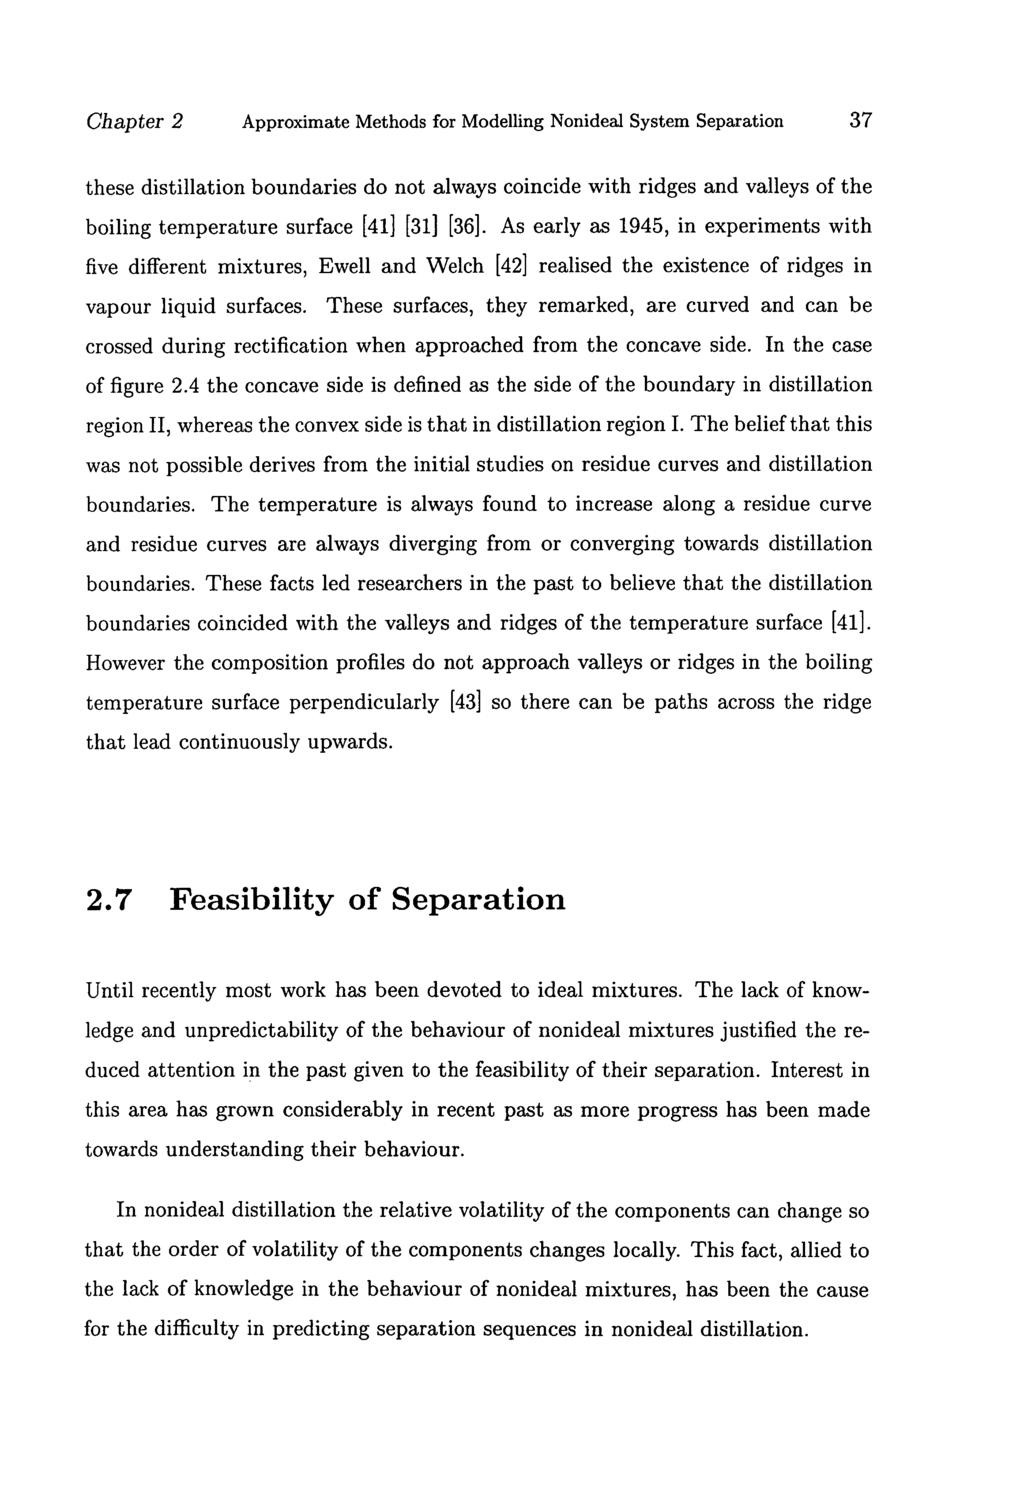 Chapter 2 Approximate Methods for Modelling Nonideal System Separation 37 these distillation boundaries do not always coincide with ridges and valleys of the boiling temperature surface [41] [31]